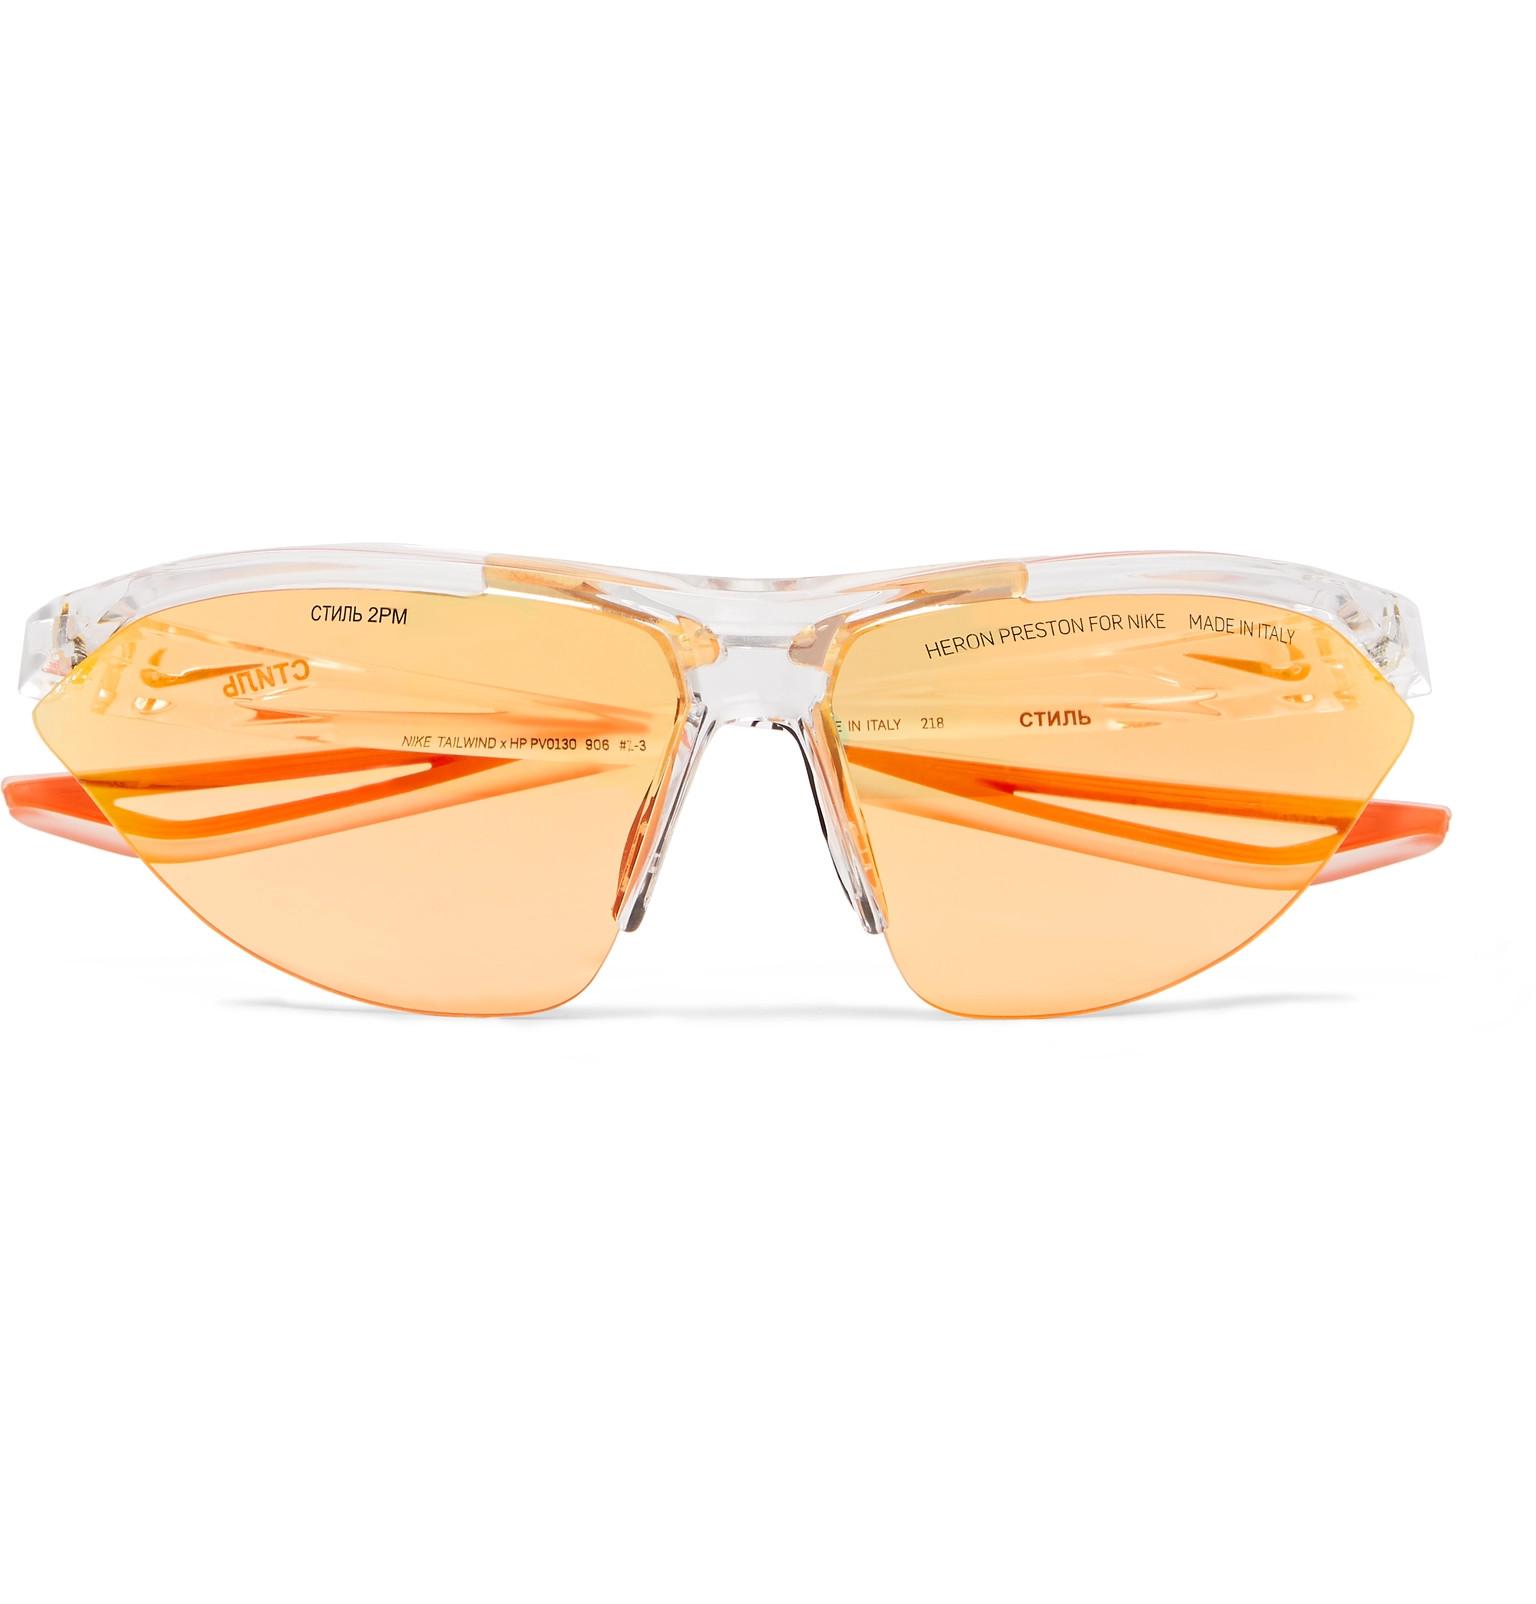 Heron Preston + Nike Tailwind Polycarbonate Sunglasses With Interchangeable  Lenses for Men - Lyst